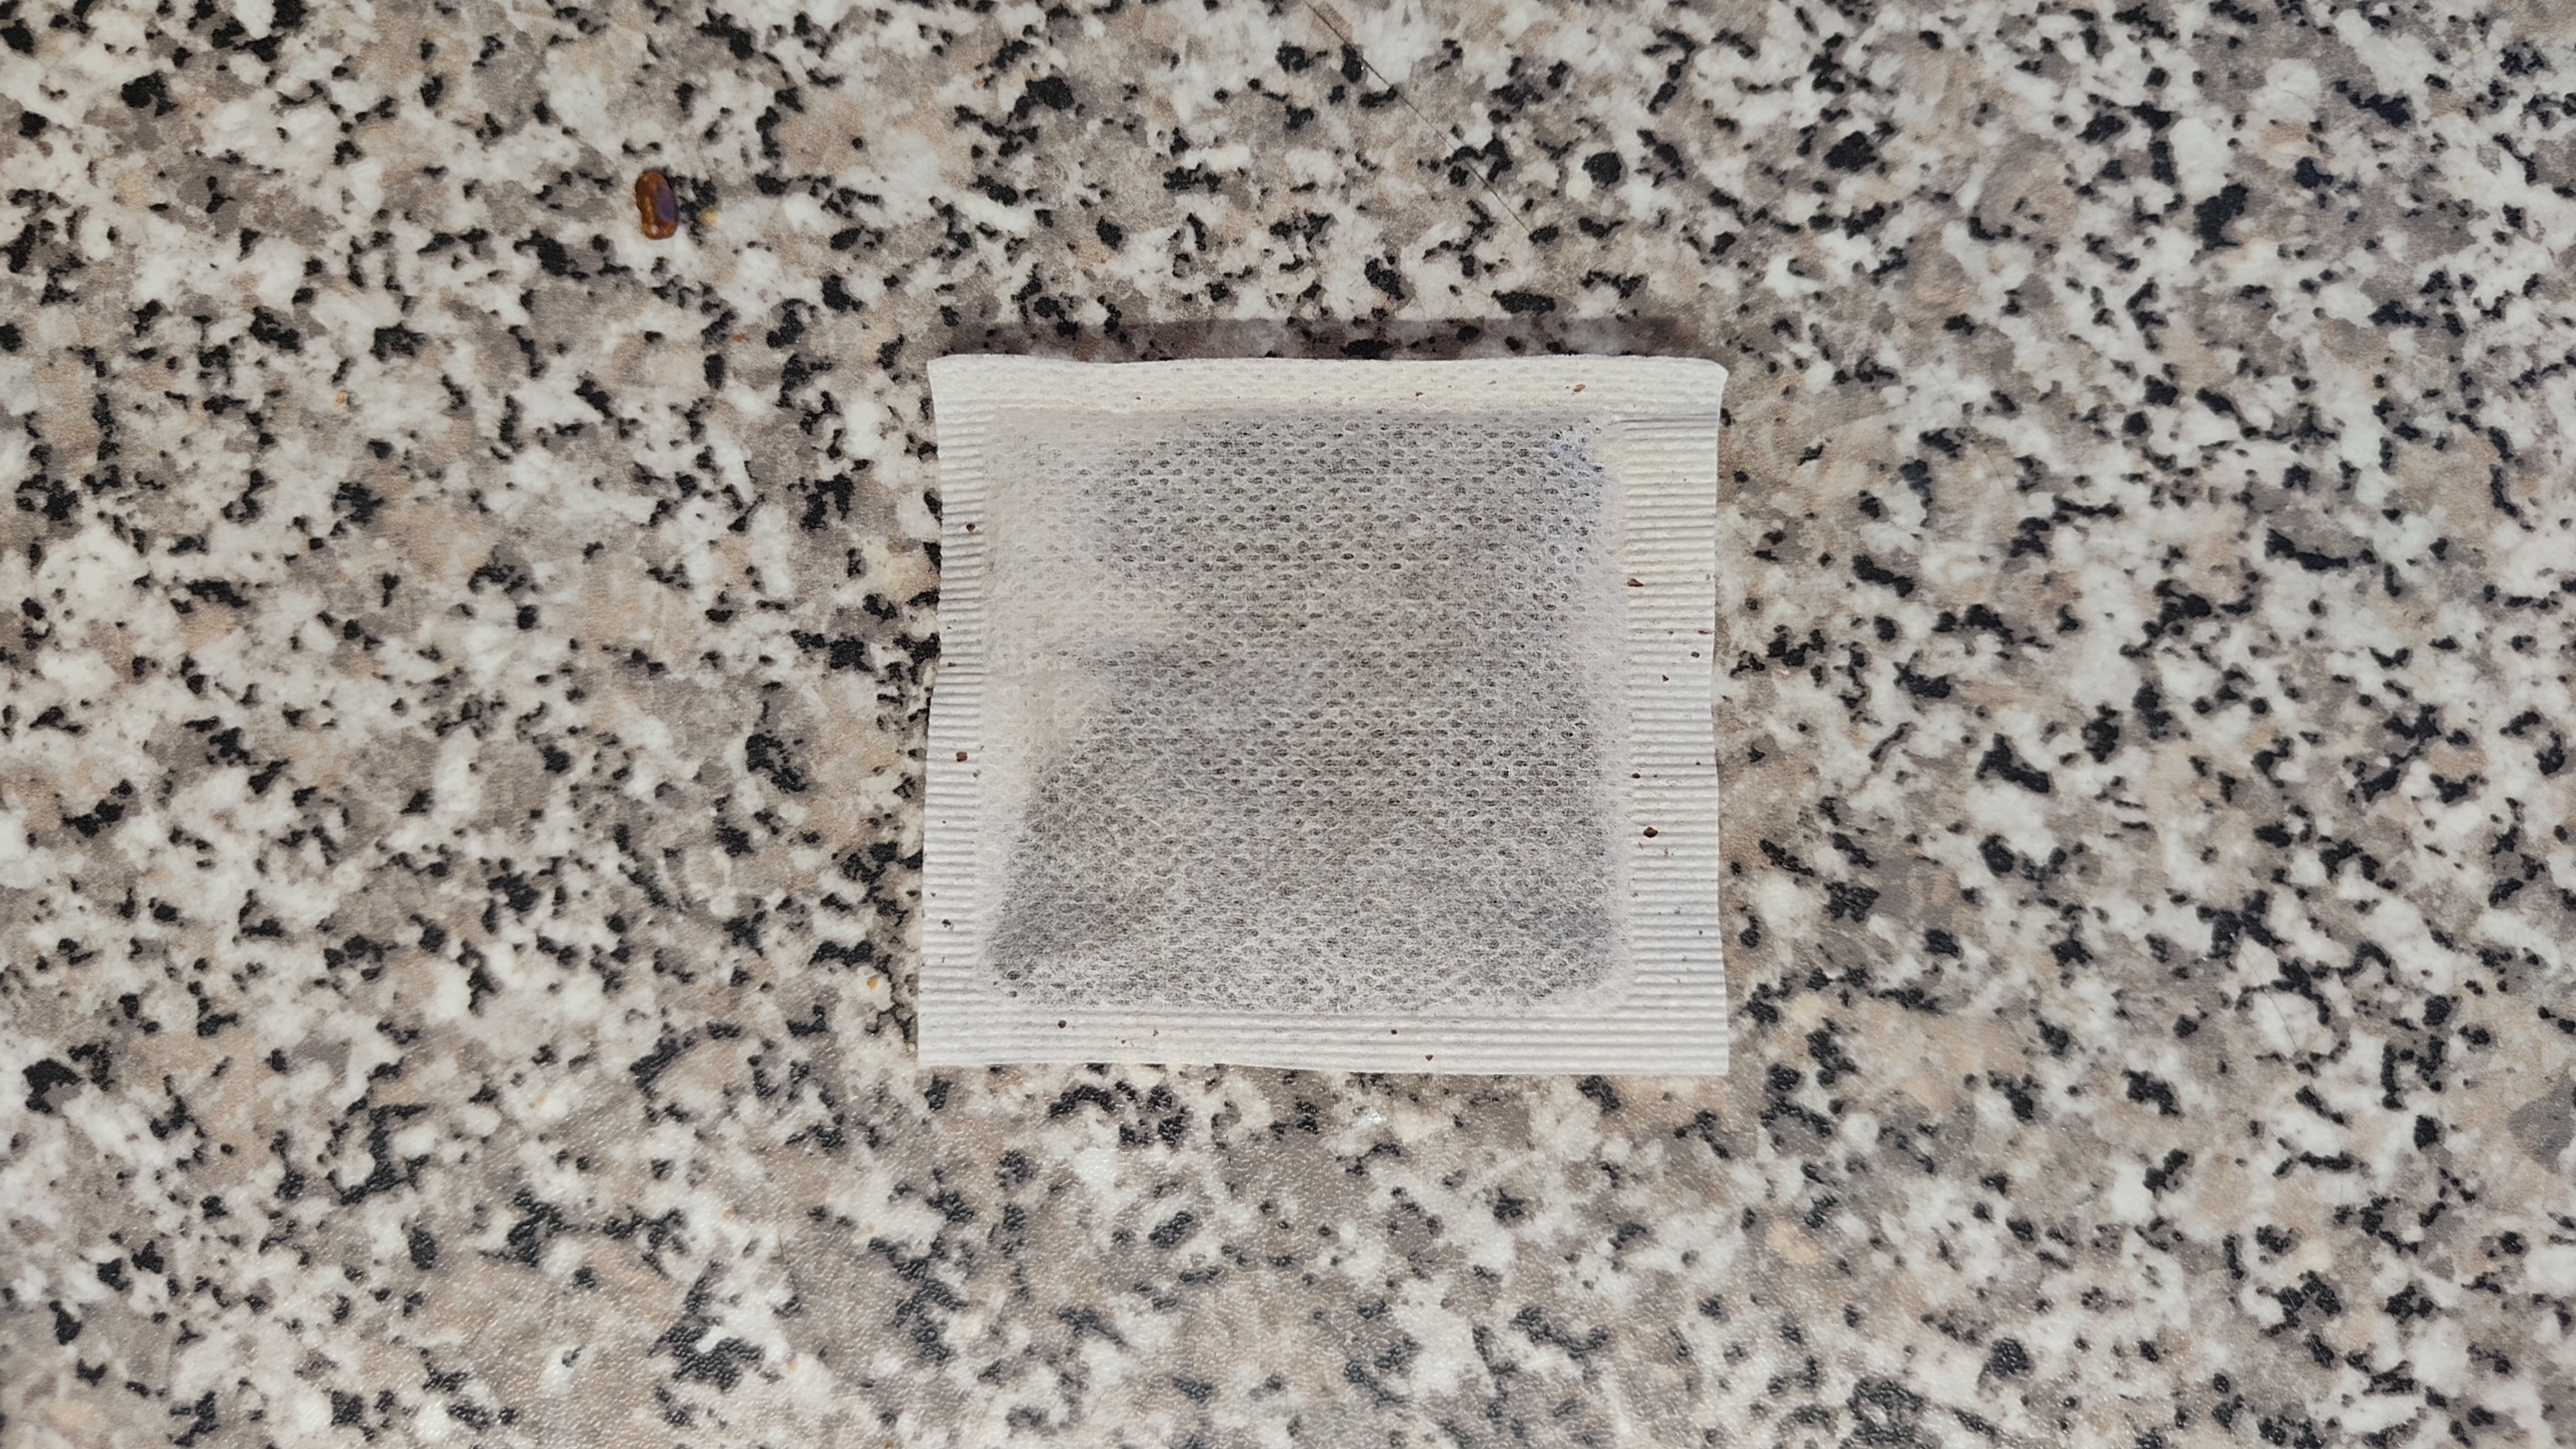 Picture of a teabag taken using the Realme GT 2 Pro